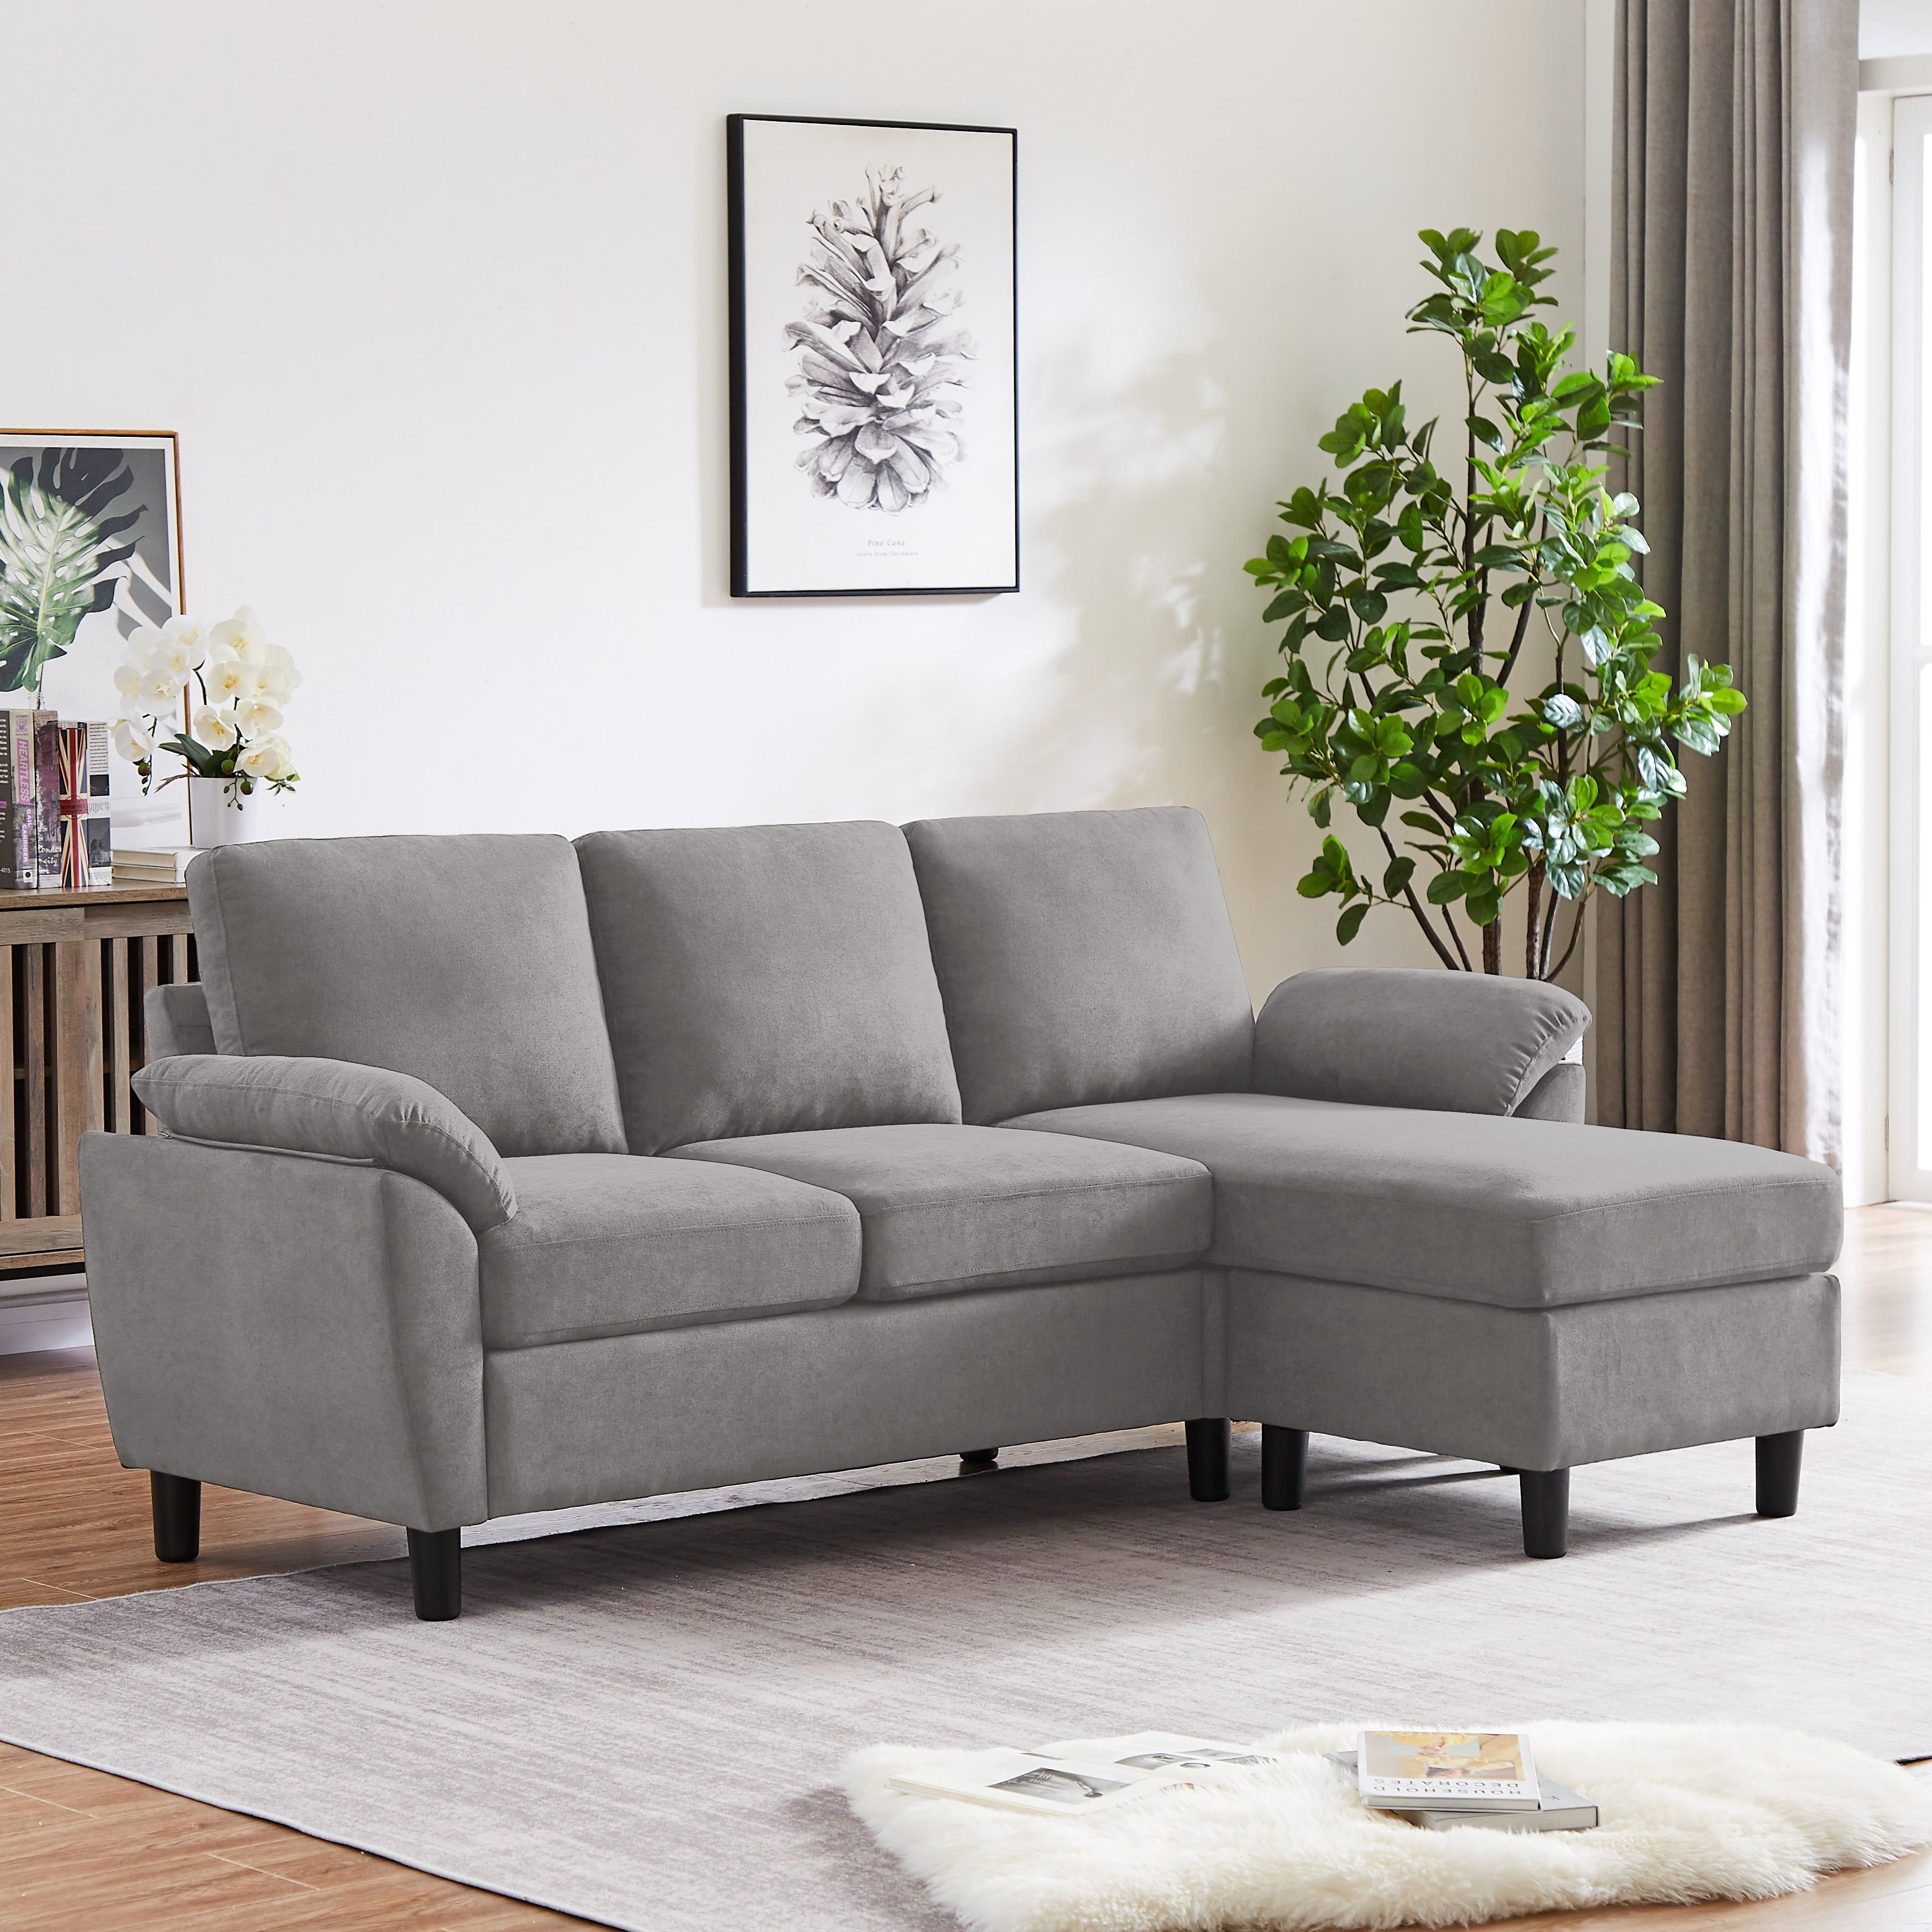 Jarenie Modern Fabric L Shapped Sofa Sectional Couches For Living Room Convertible  Sofa With Matching Chaise For Office, Apartment, Studio – Walmart With Convertible Sofa With Matching Chaise (View 2 of 15)